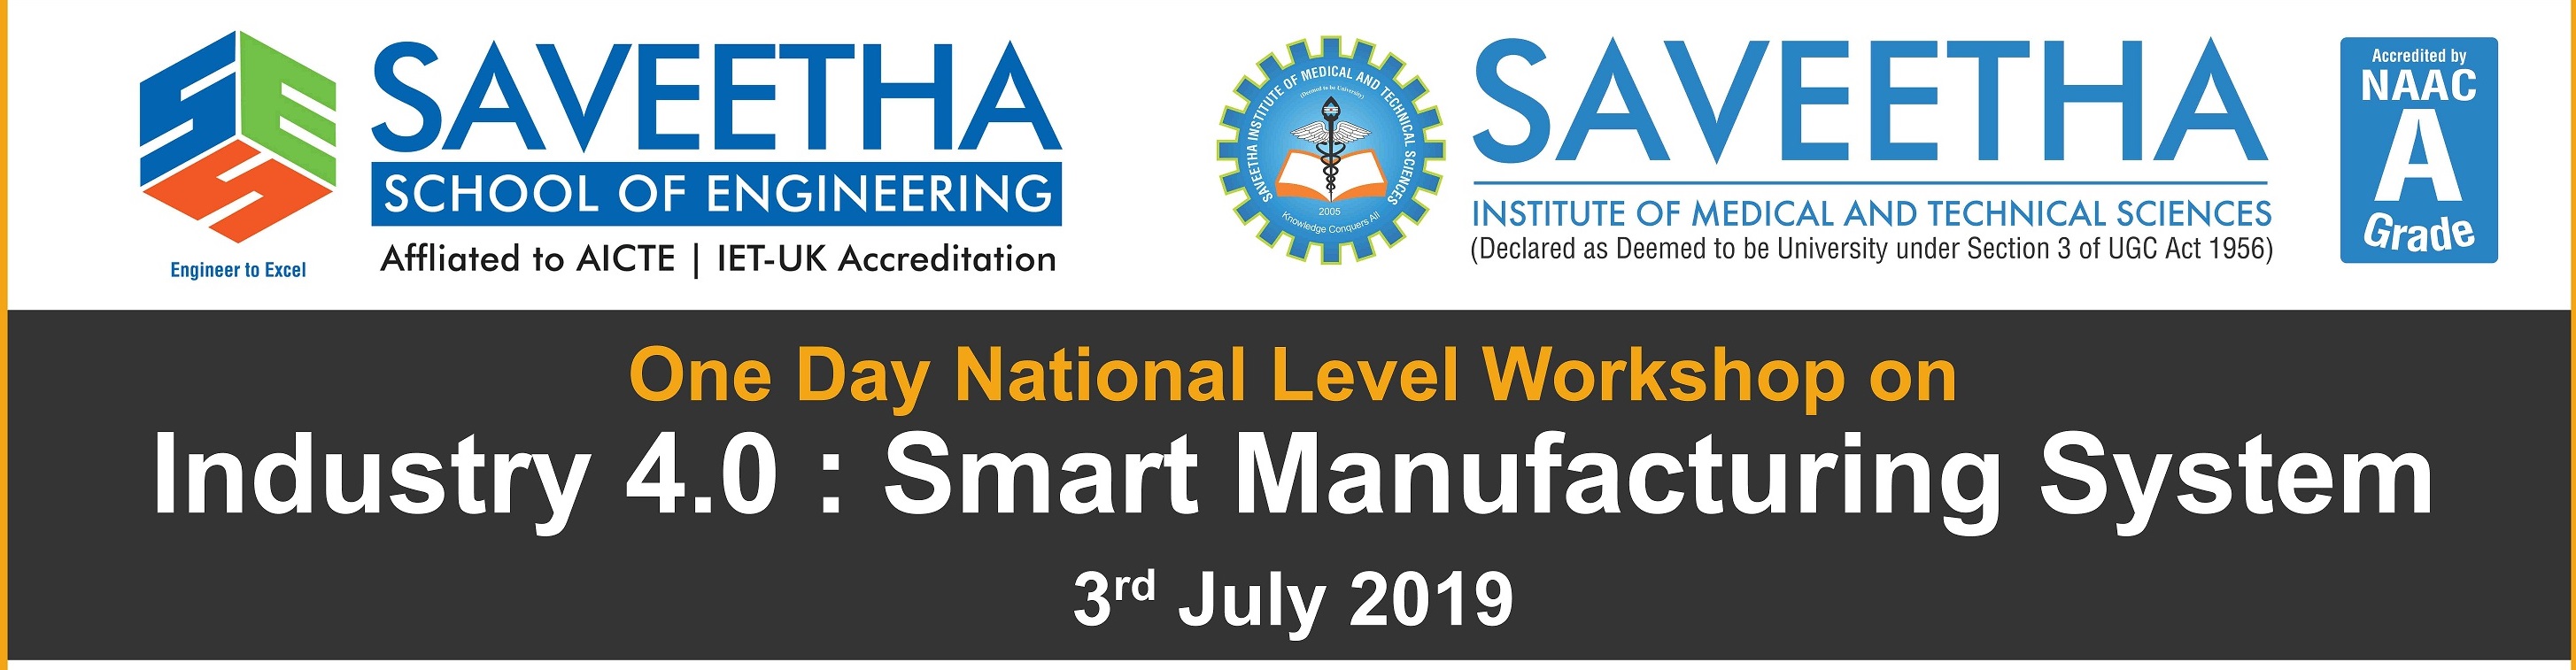 One Day National Level Workshop on Industry 4.0 : Smart Manufacturing System, Chennai, Tamil Nadu, India